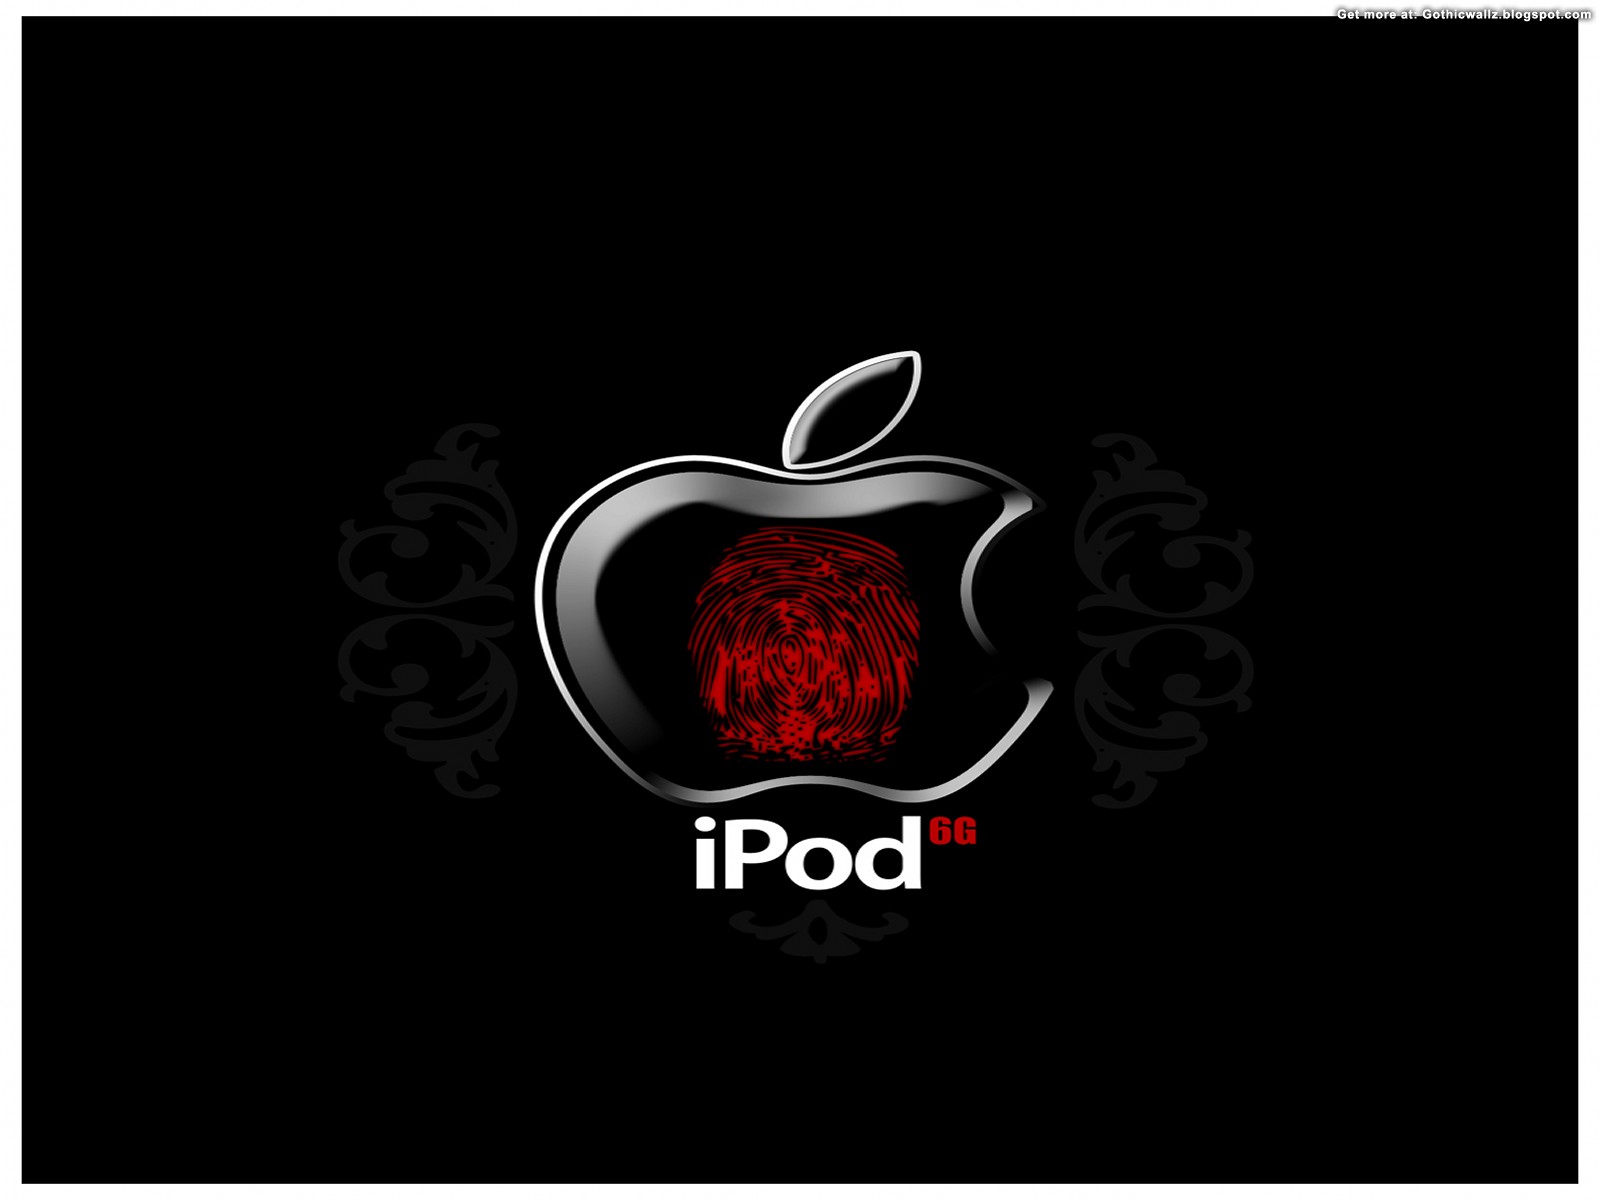 HD Wallpapers For Apple iPodHD Wallpapers